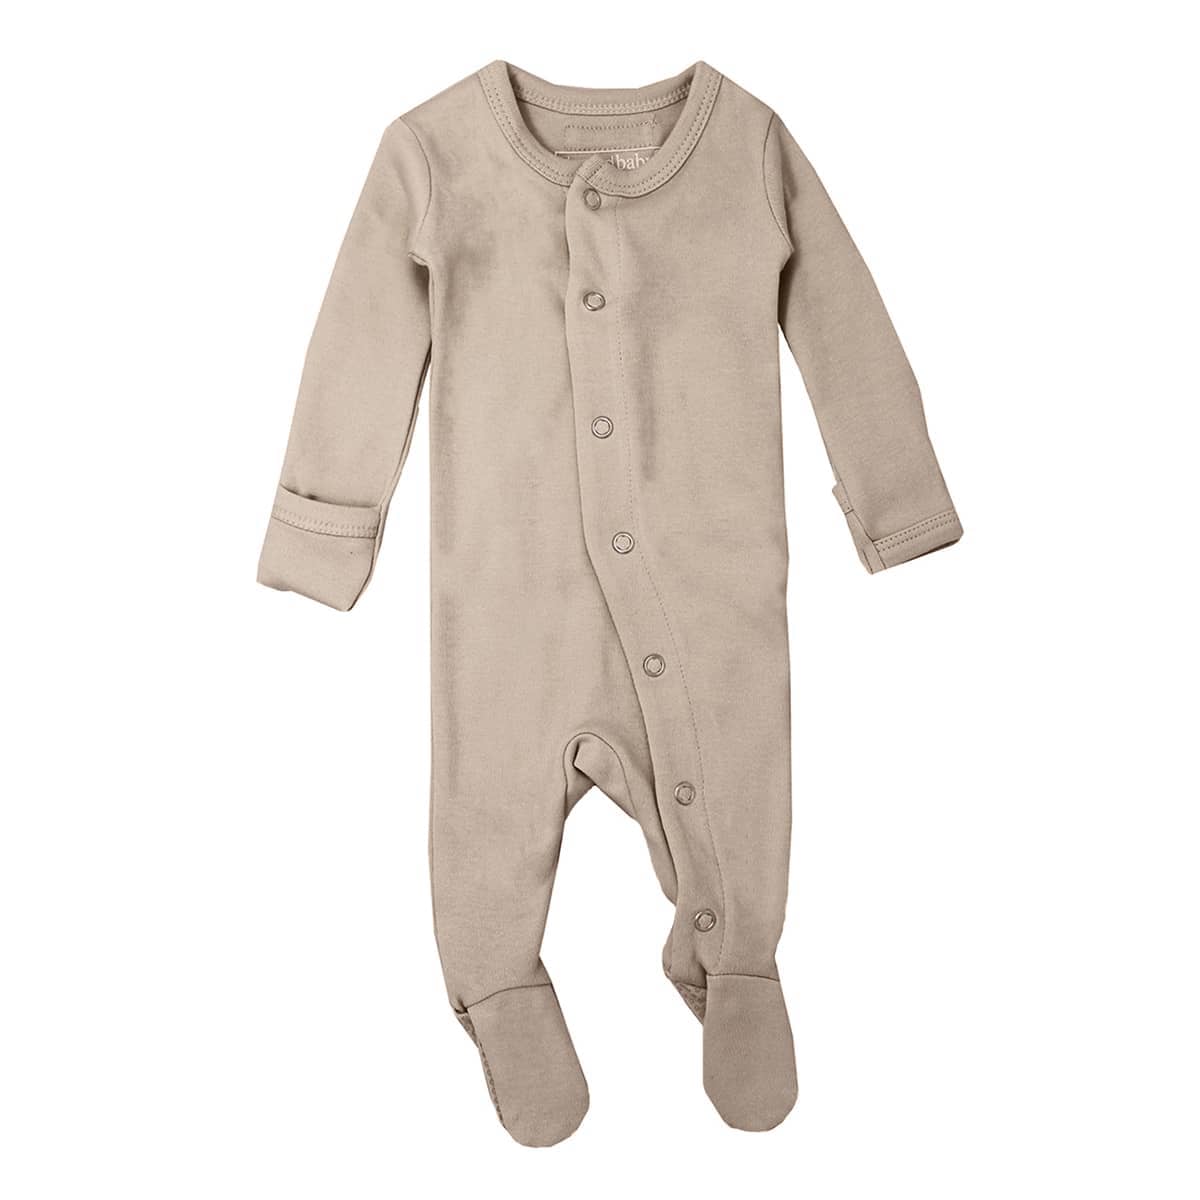 L'ovedbaby Organic Gl'oved Footed Overall - Oatmeal